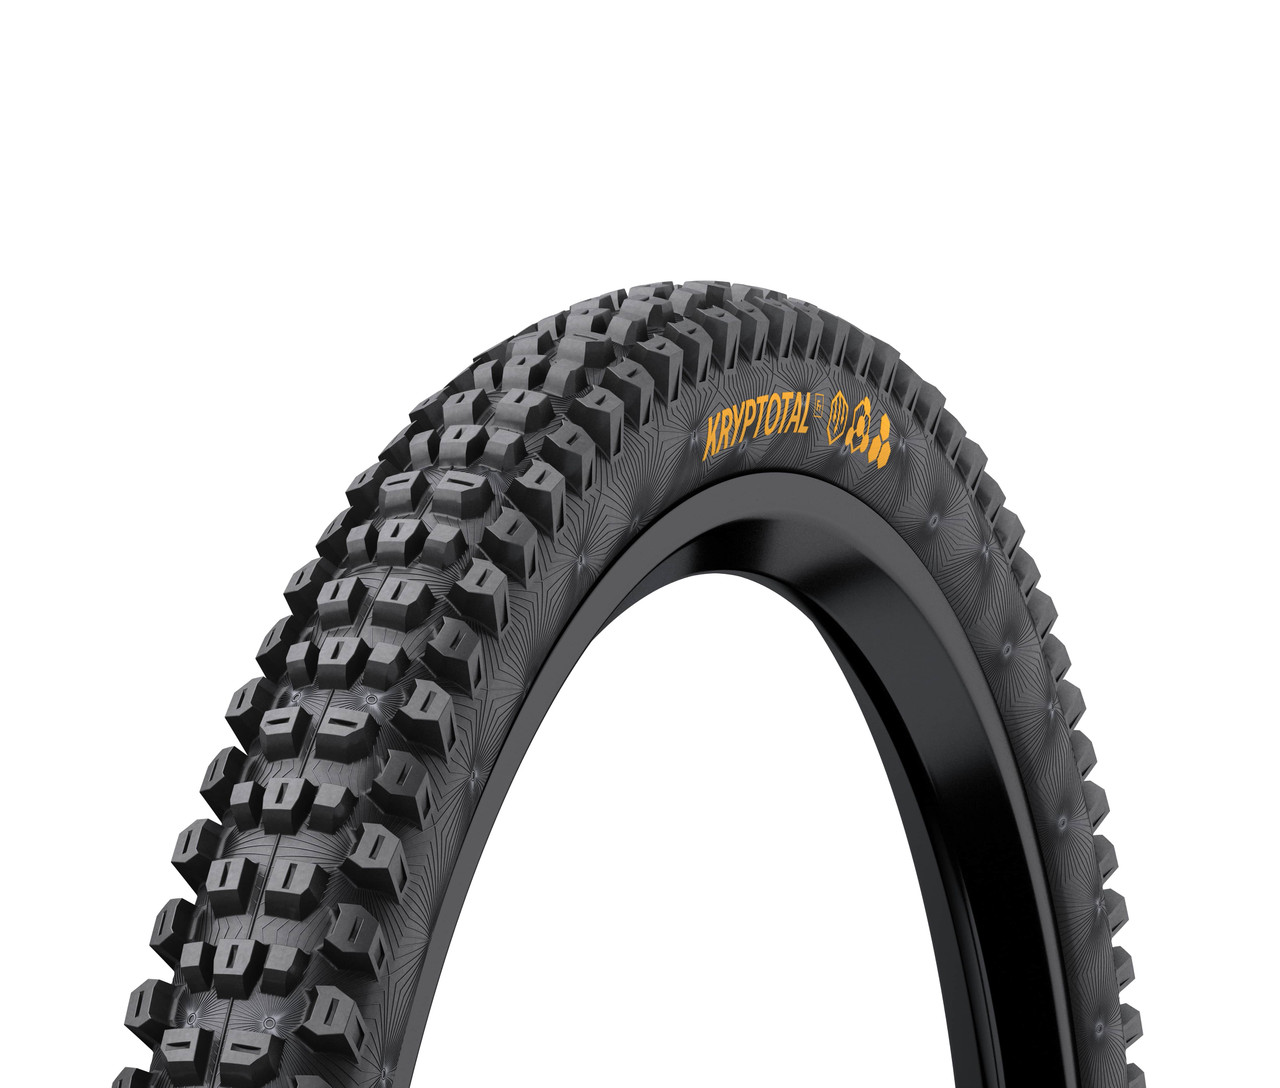 Continental Kryptotal MTB Downhill Casing Super Soft Compound Front Tyre